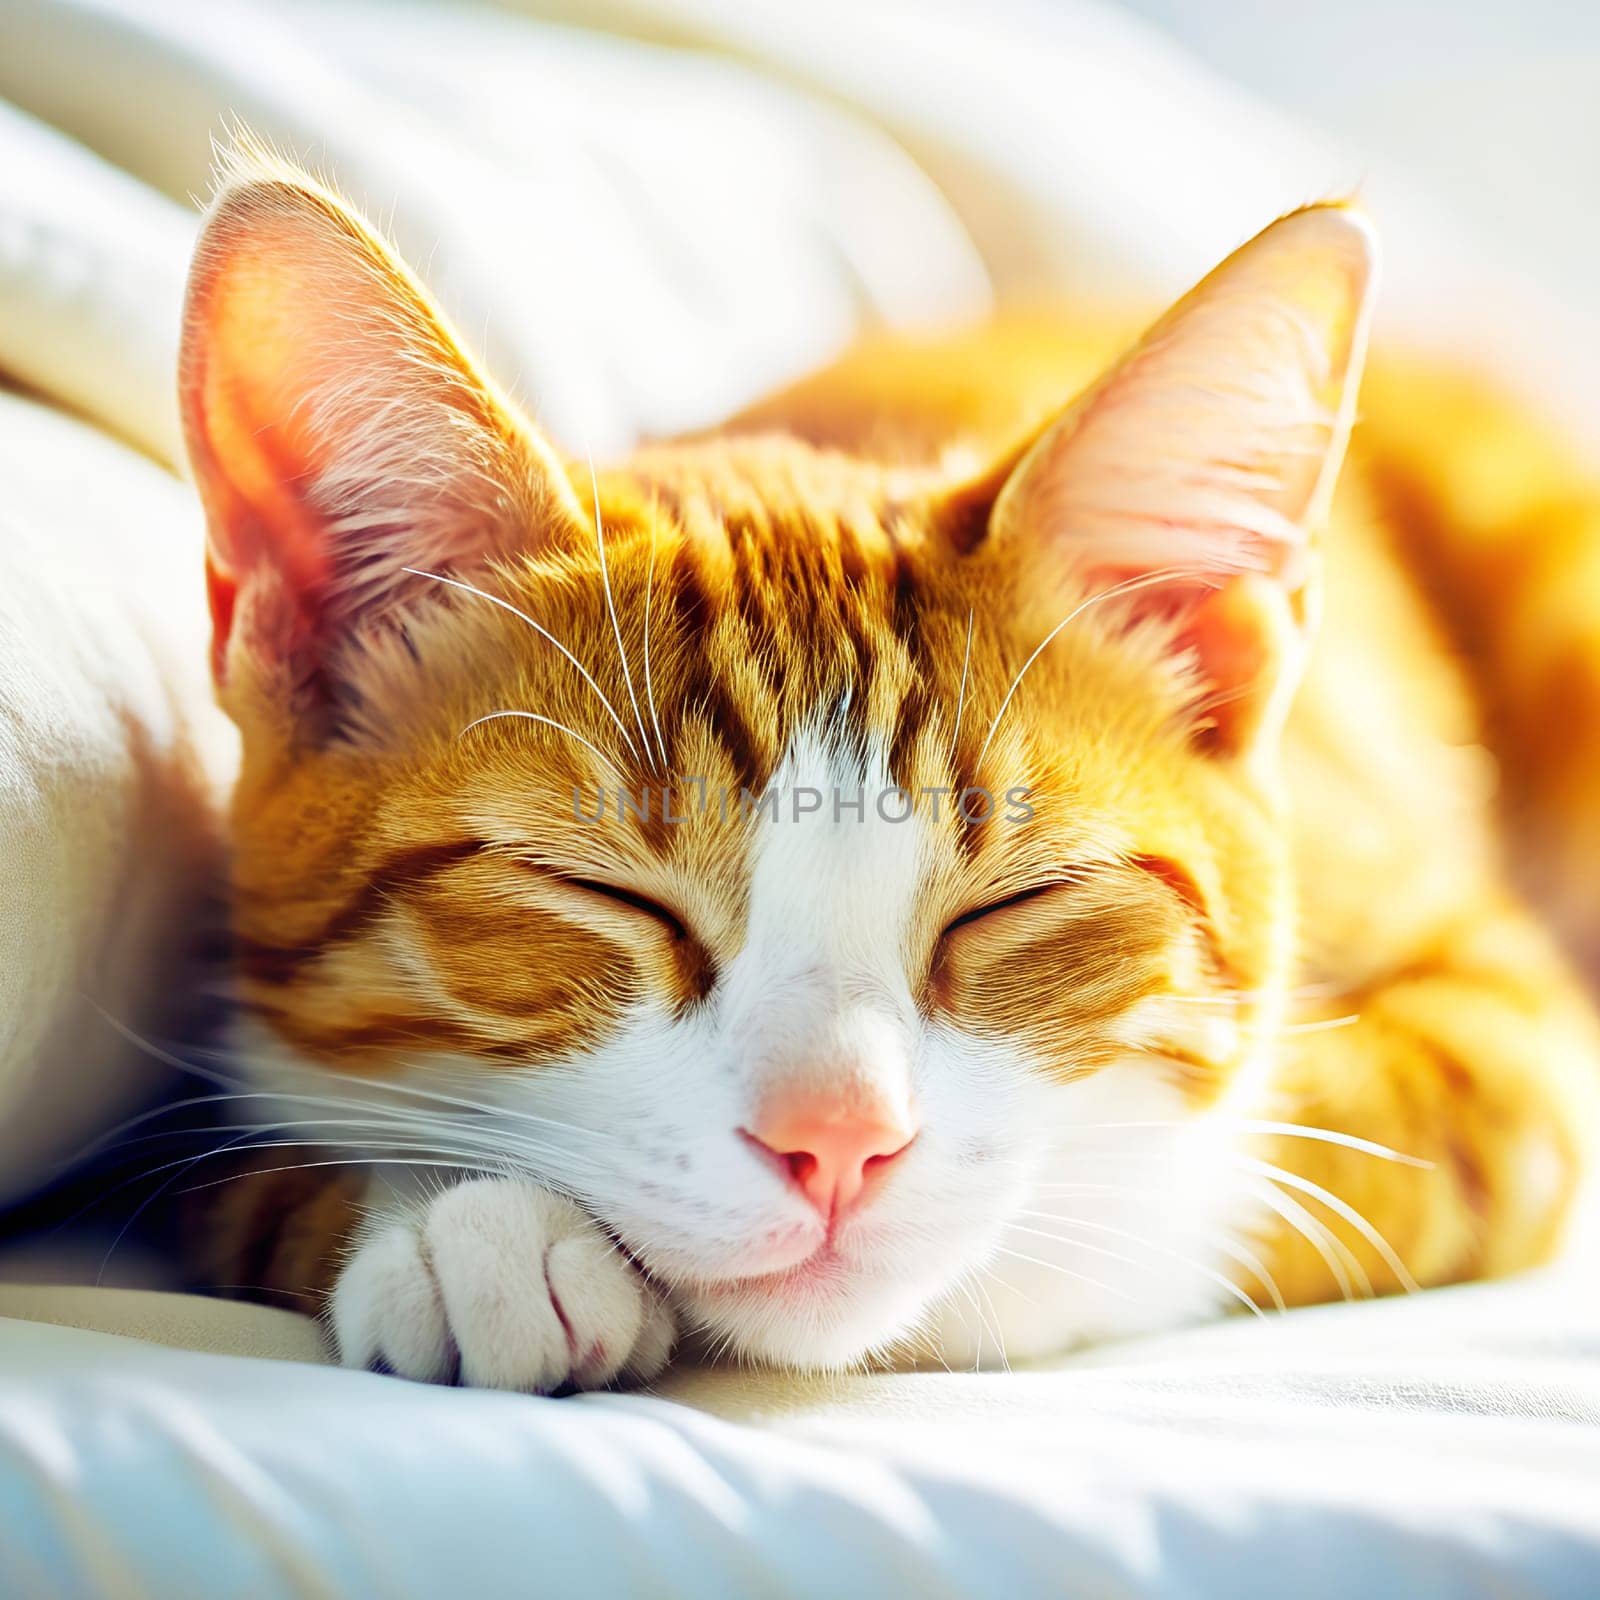 Sleeping orange cat close-up, generated by AI. by Margo